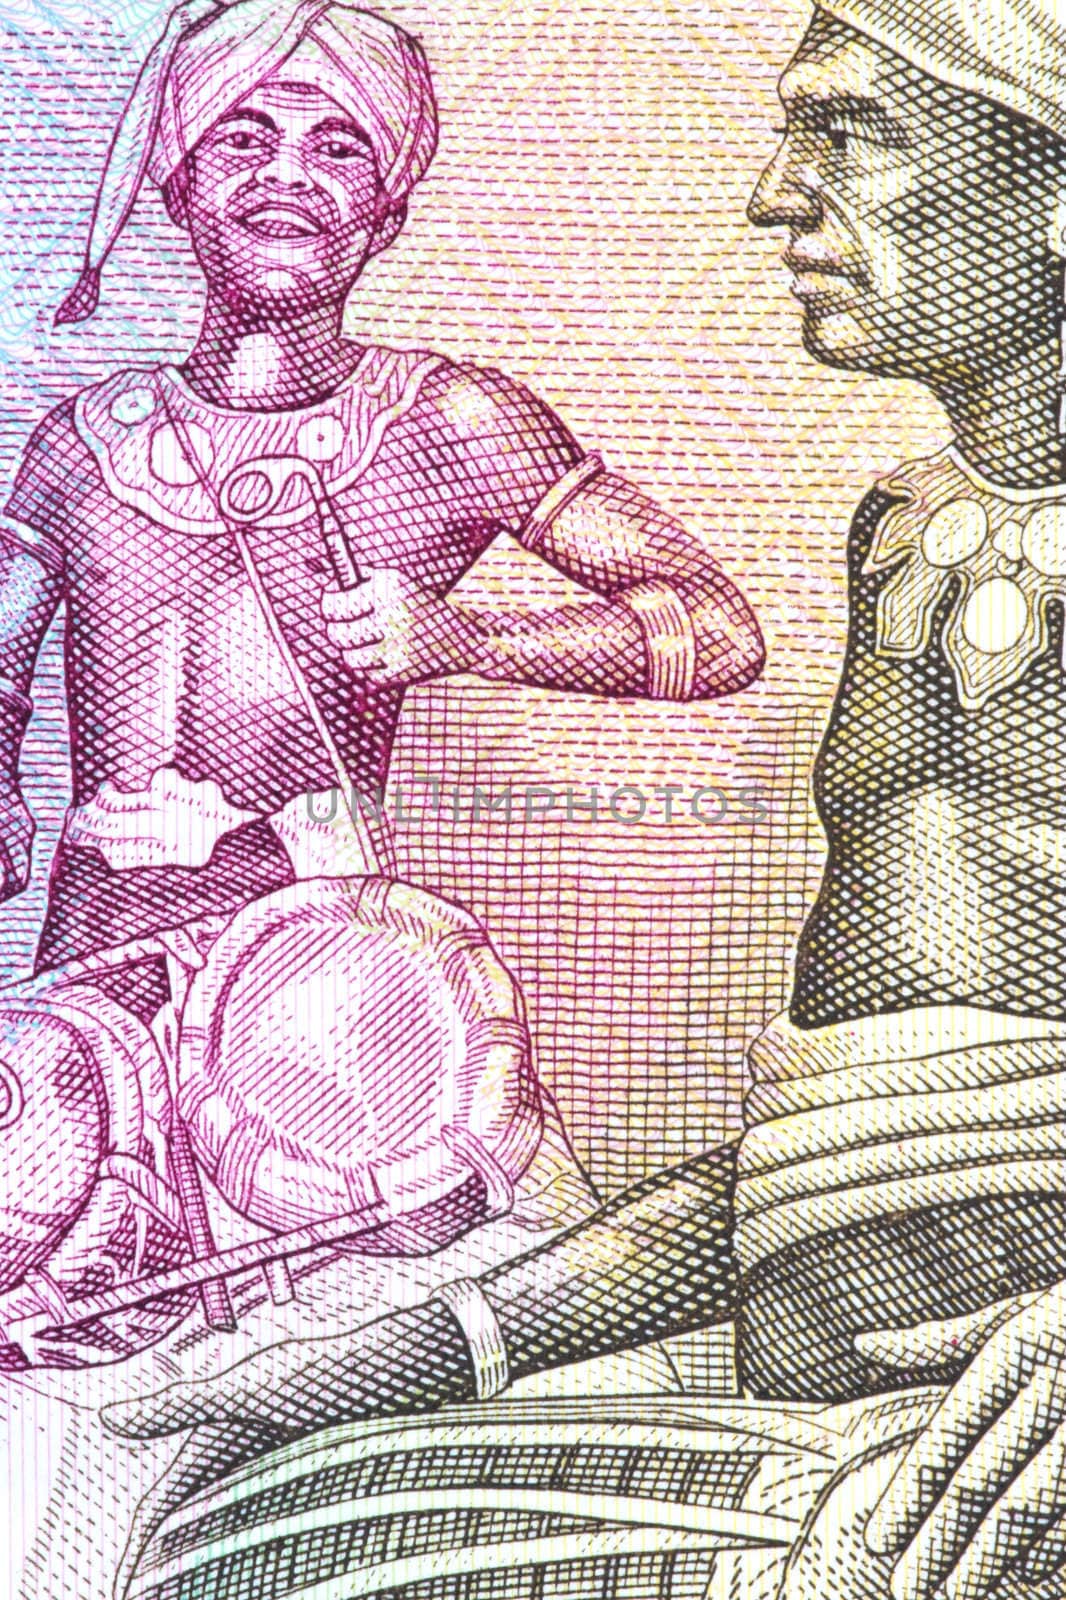 Macro image of tribal drummers on a currency note.